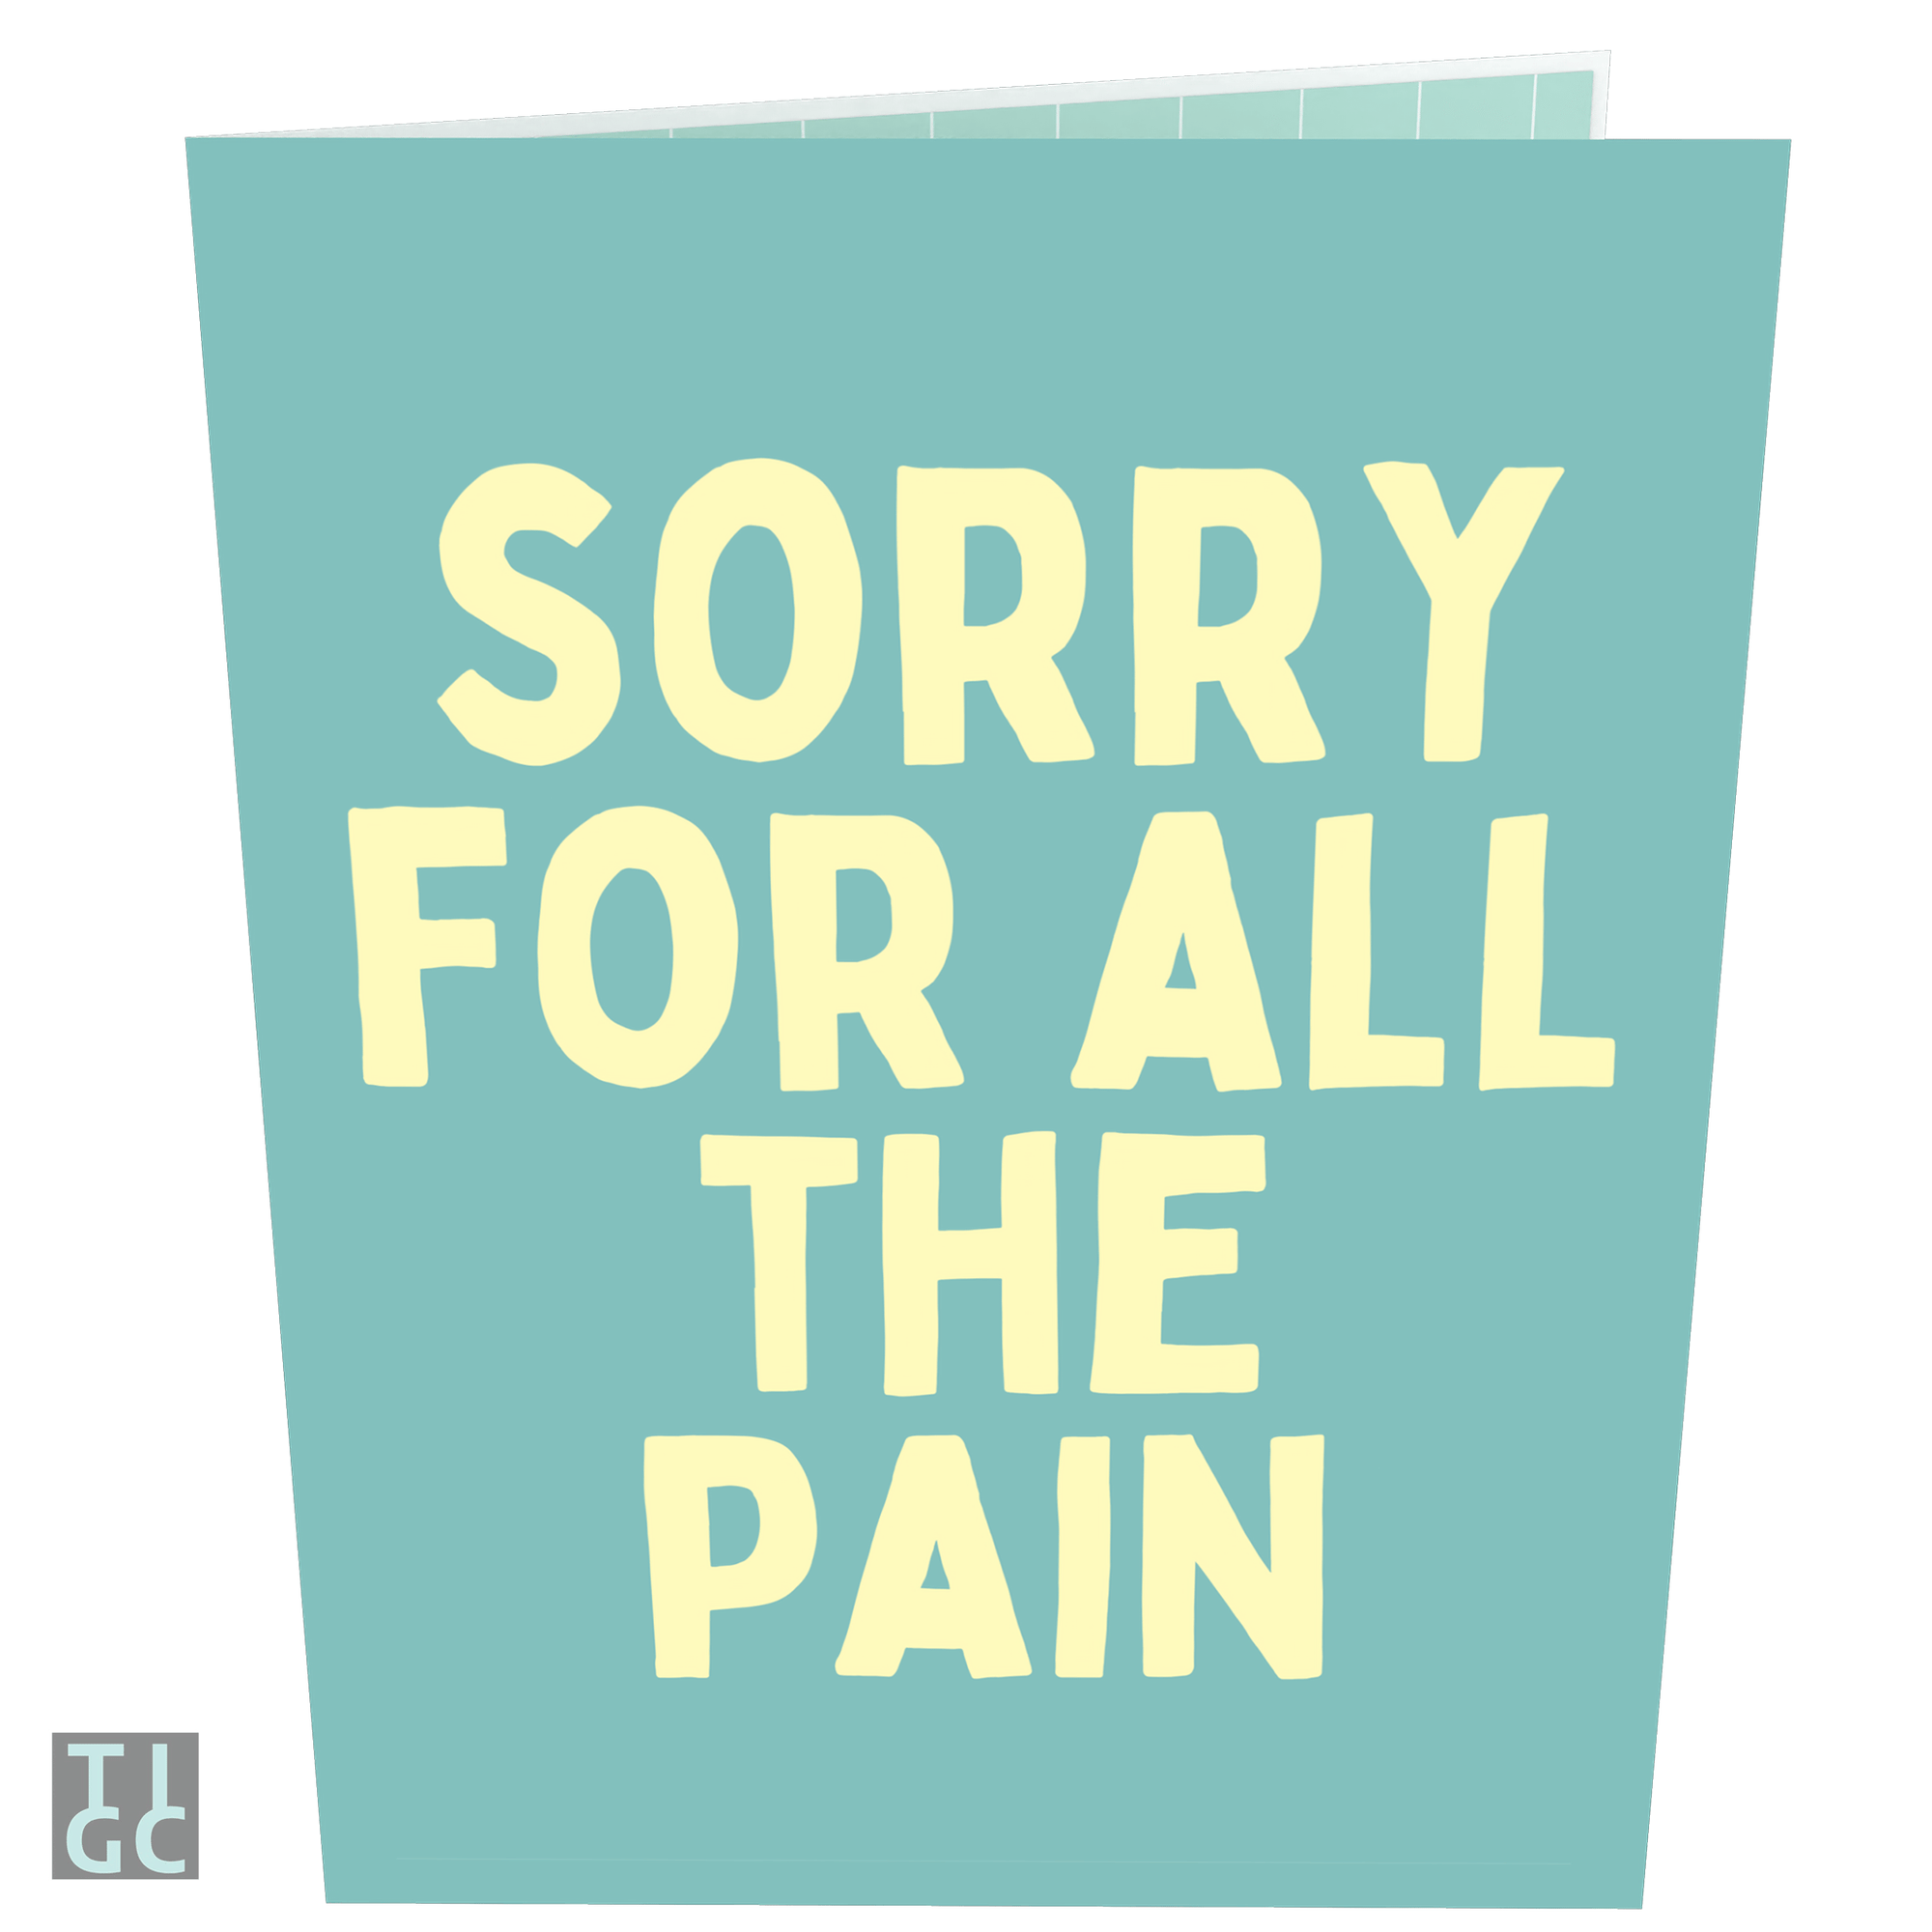 Sorry for all the pain 3D pop out card